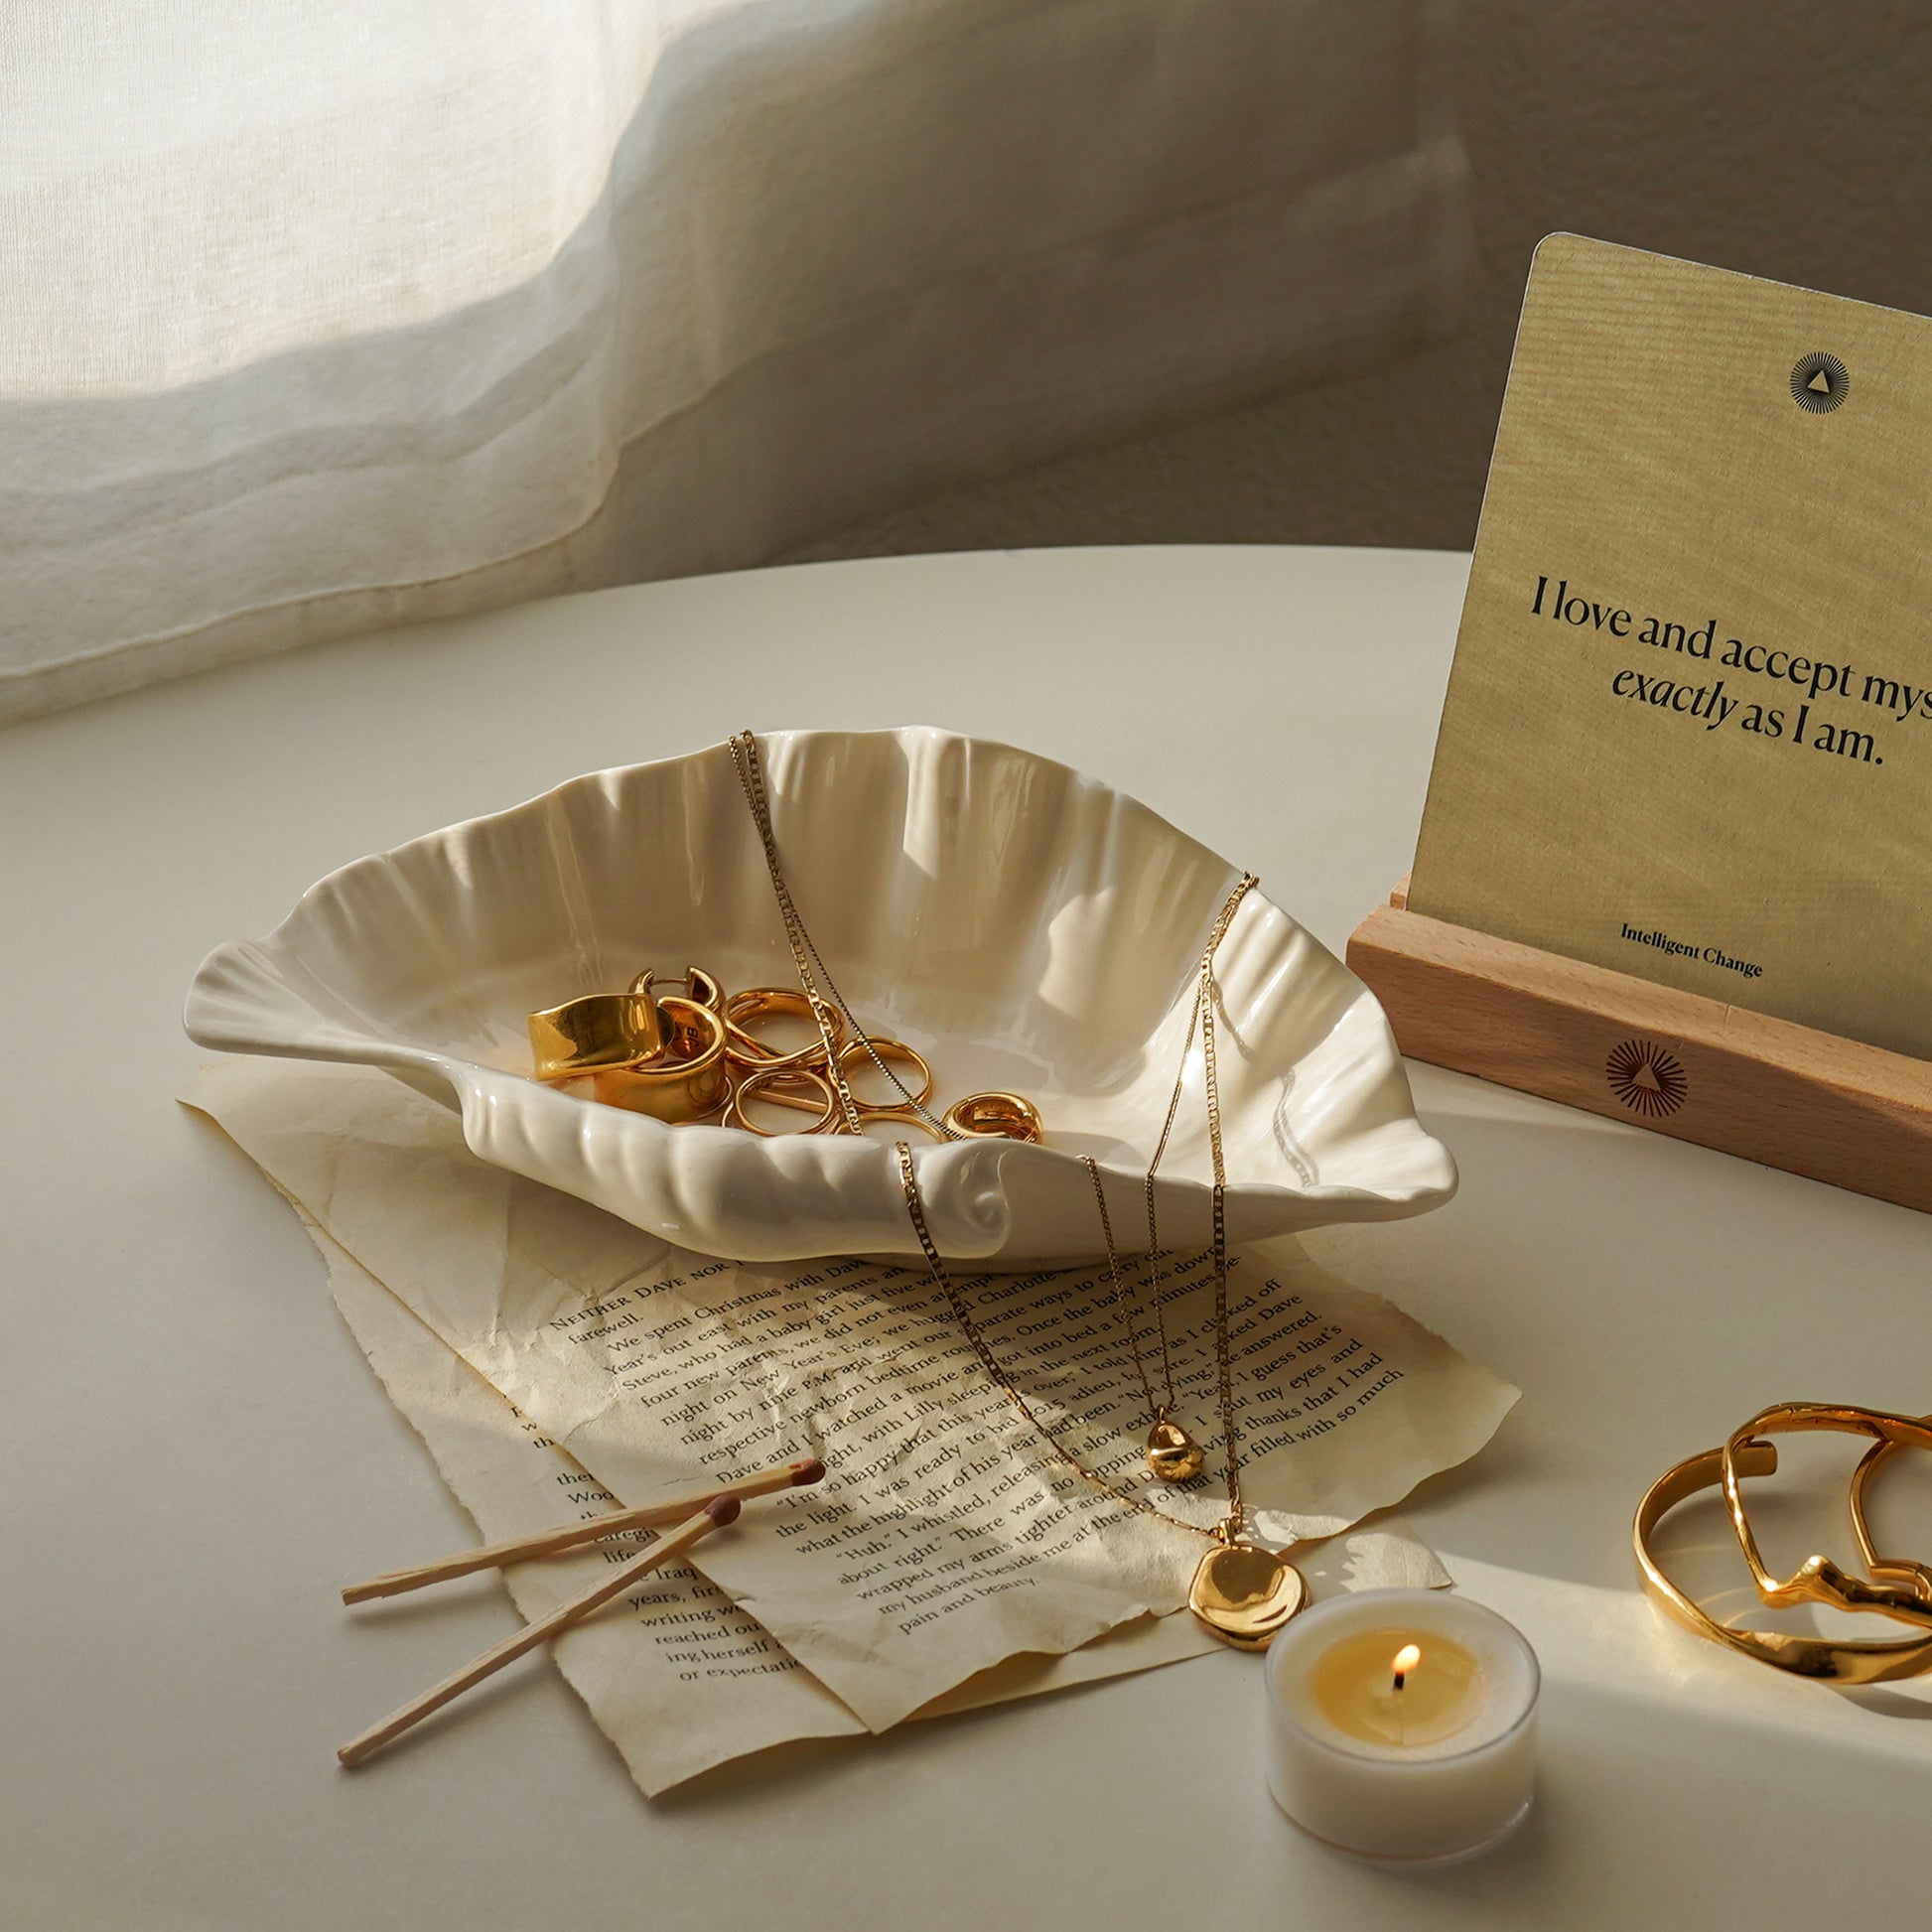 gold jewelry placed in an open shell ceramic tray on book pages, matches, a lit tealight candle, gold bracelets, and affirmation card on the white round table